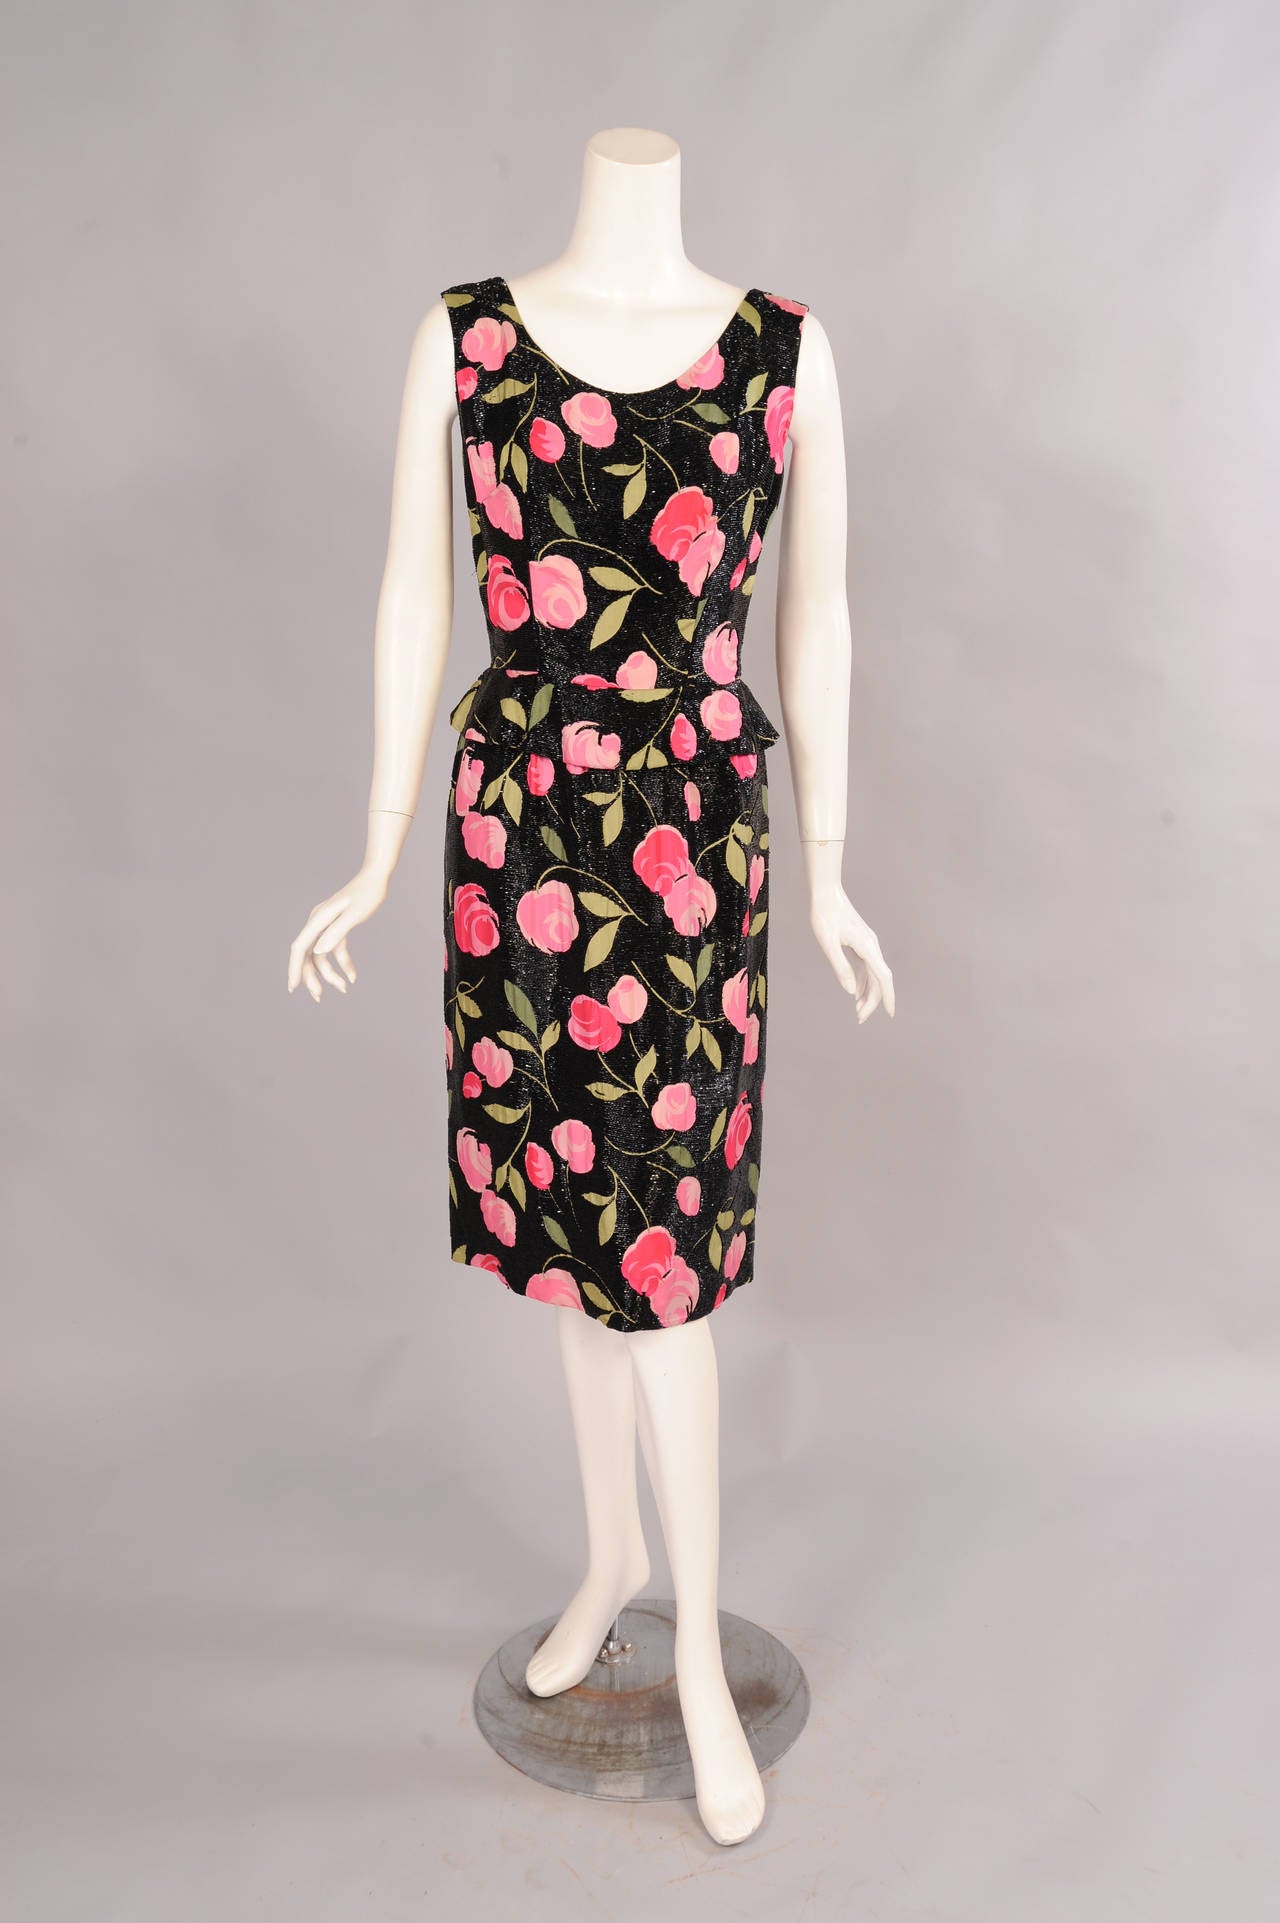 A charming pink and green floral print on a black silk background is covered in tiny black bugle beads. The dress has a peplum at the waist and a center back zipper. It is fully lined with a combination of pink organza and black taffeta. It is in